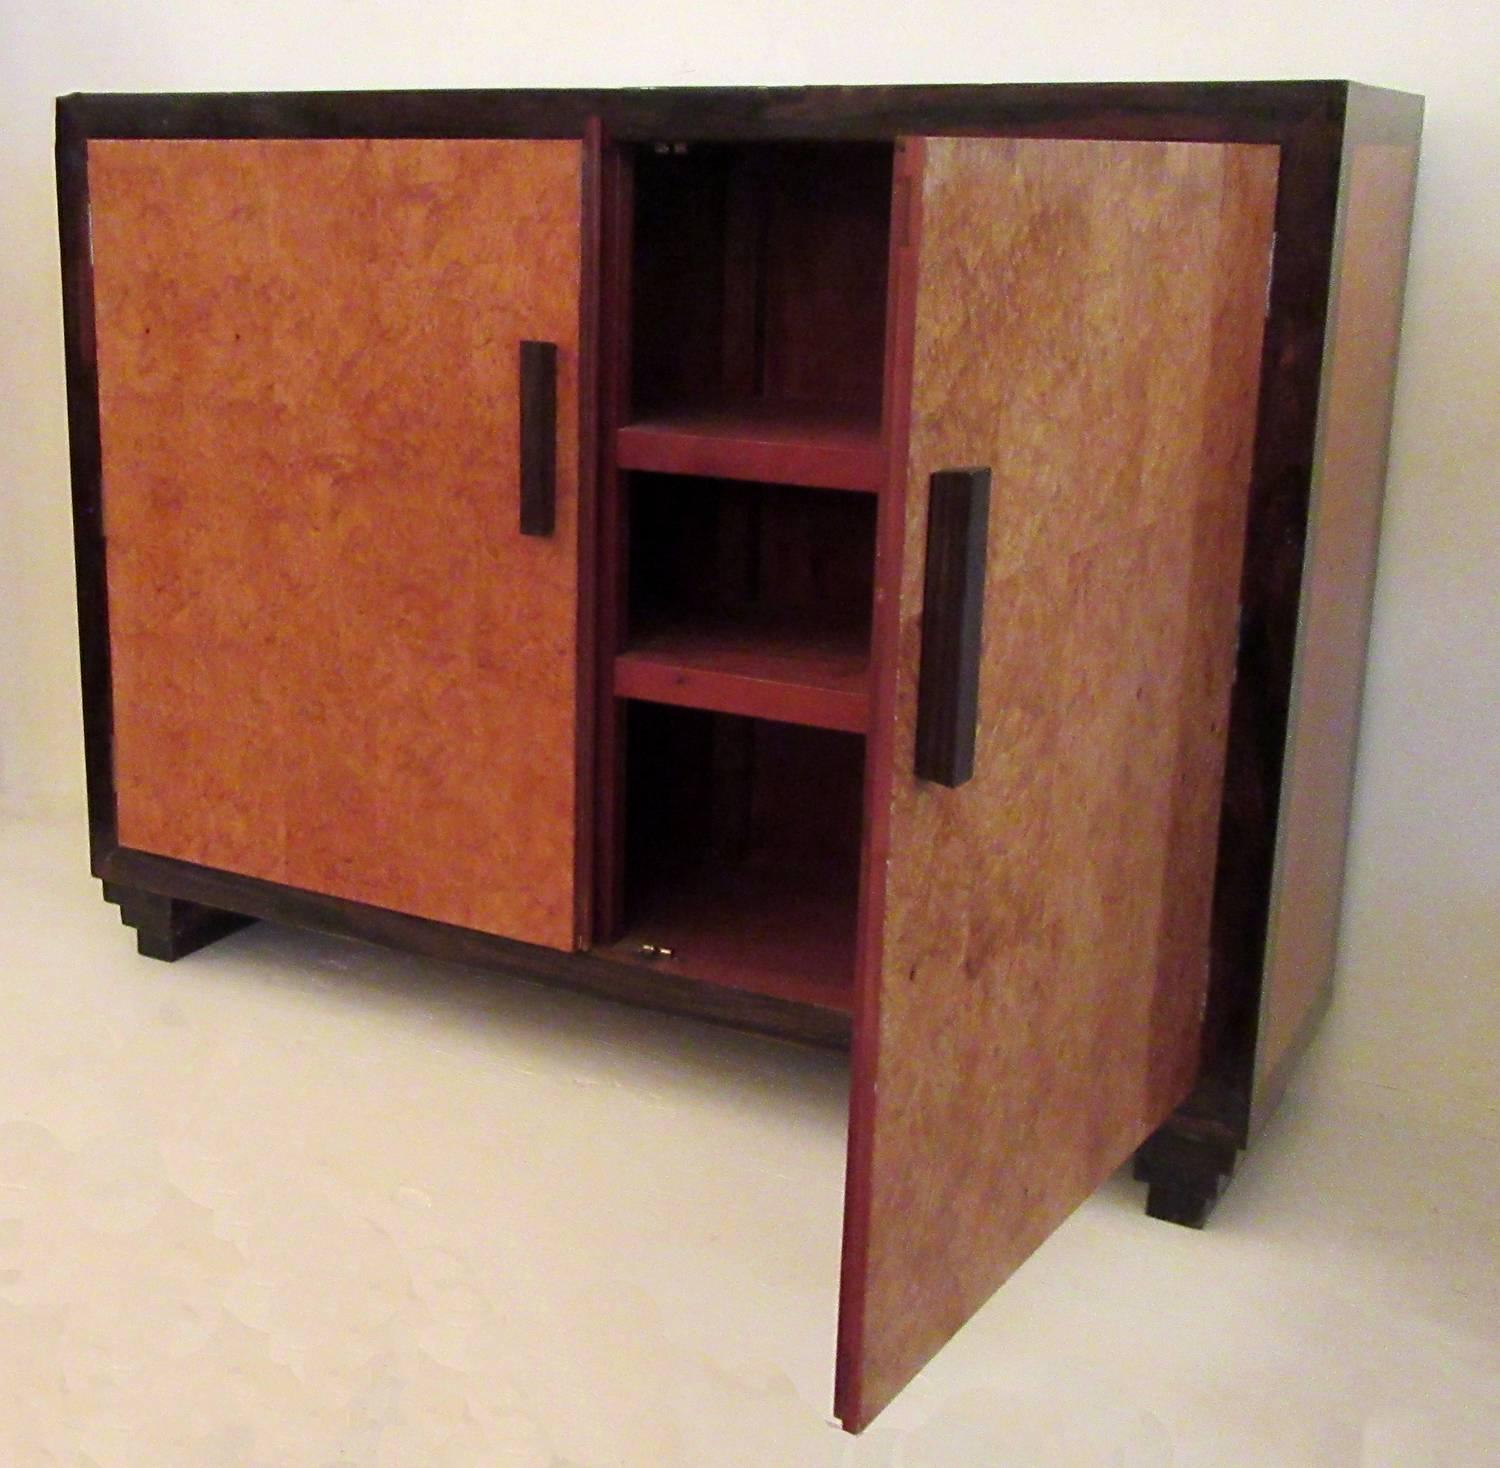 An Art Deco style exotic wood cabinet, circa 1940, from Georgetown, British Guyana. Many fine furniture was crafted there due to the access of South American exotic hardwoods. This cabinet is featured in a book by author Michael Connors detailing